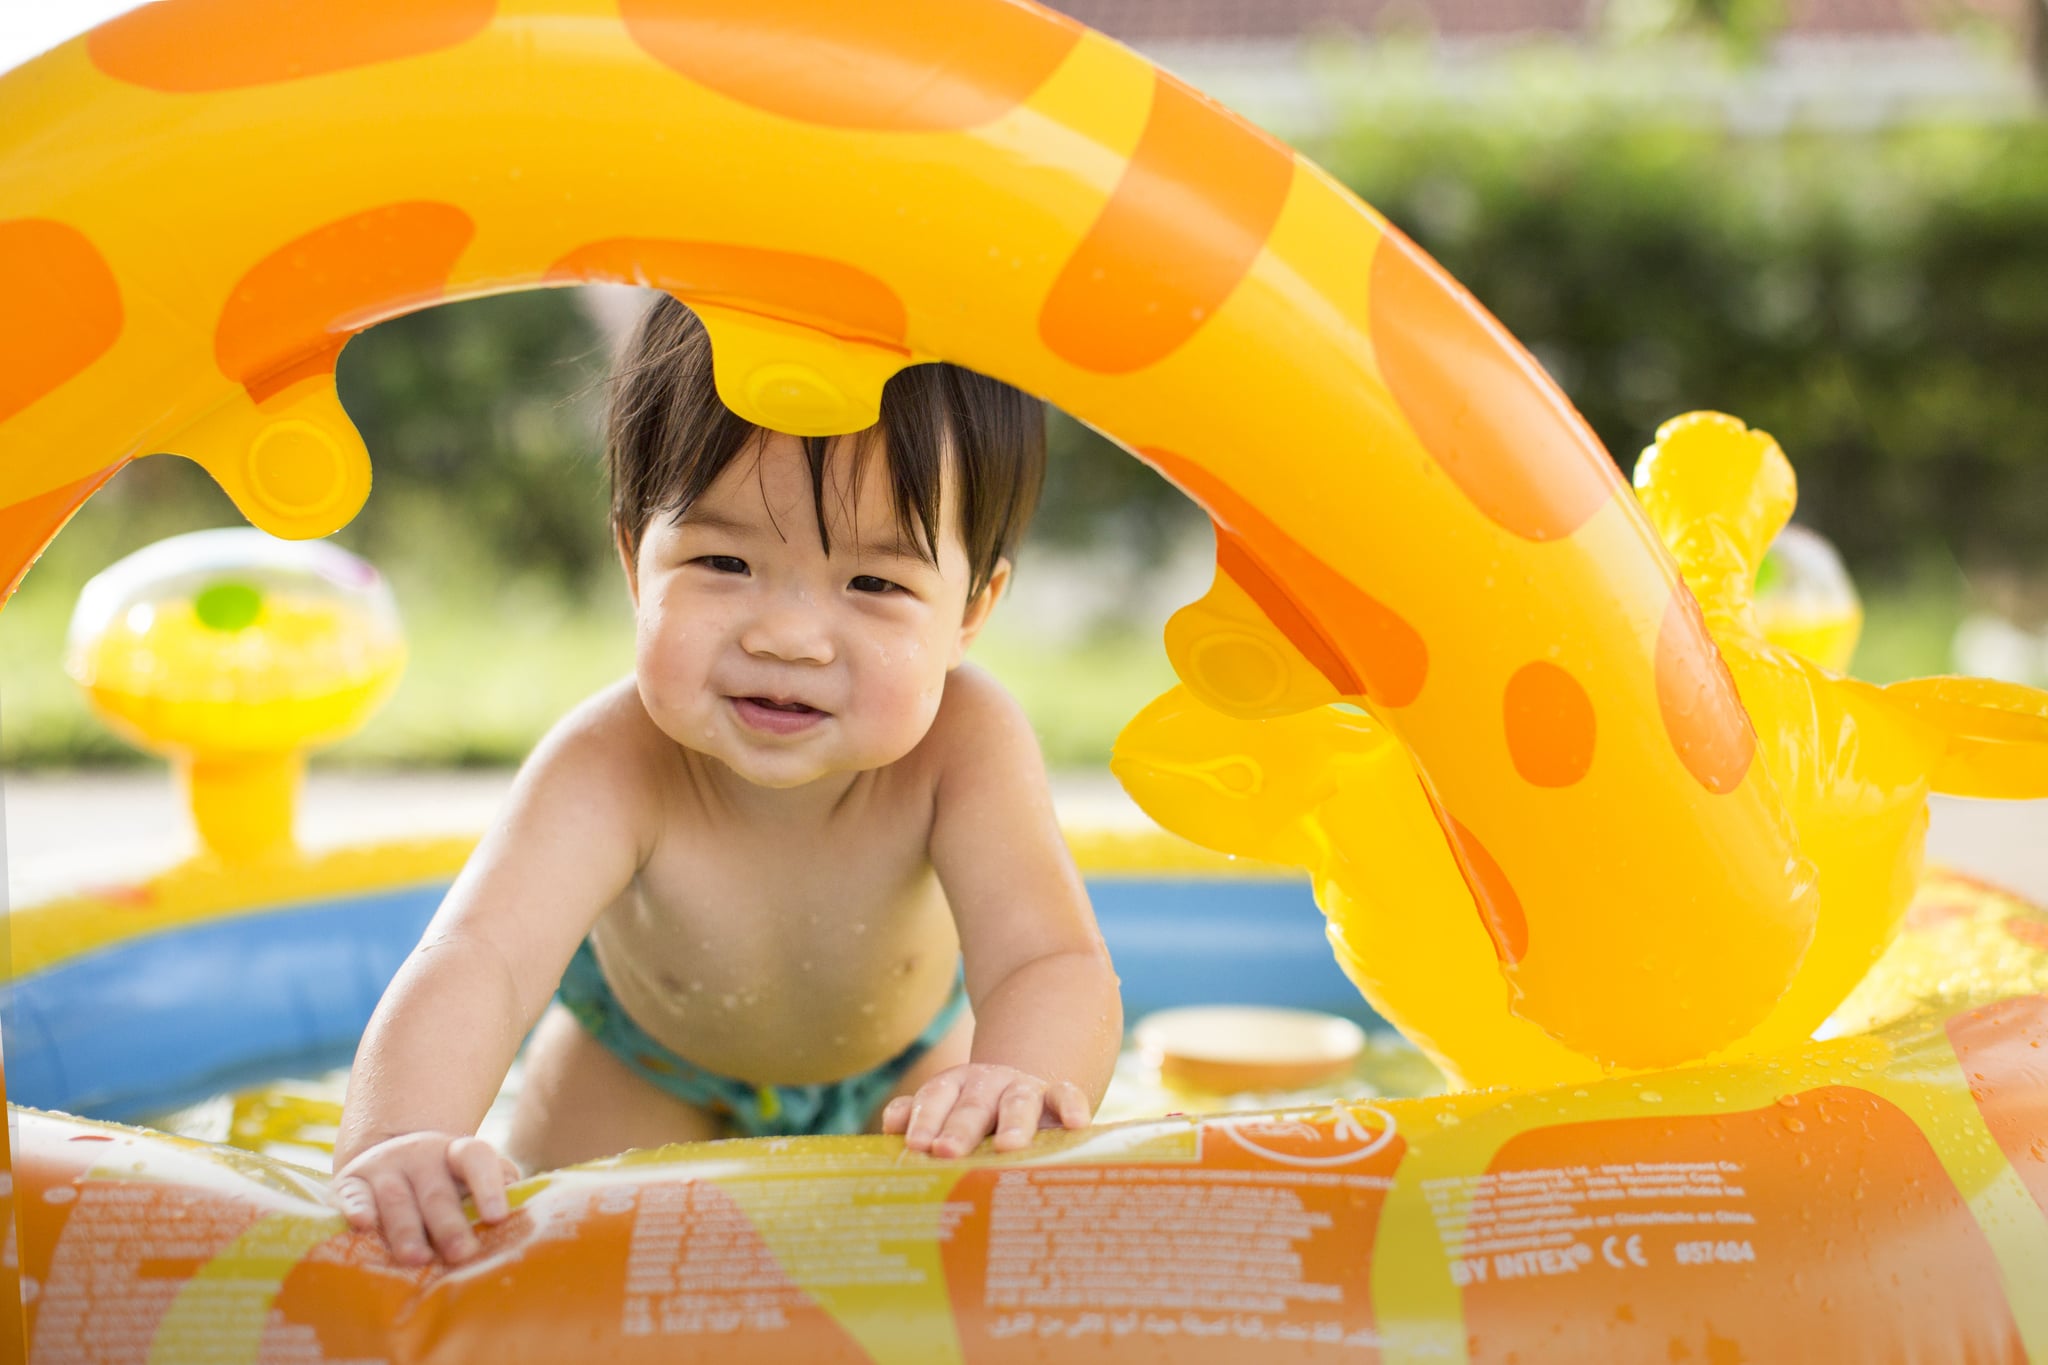 Asian toddler in swimming trunk looking happy in animal theme inflatable pool.